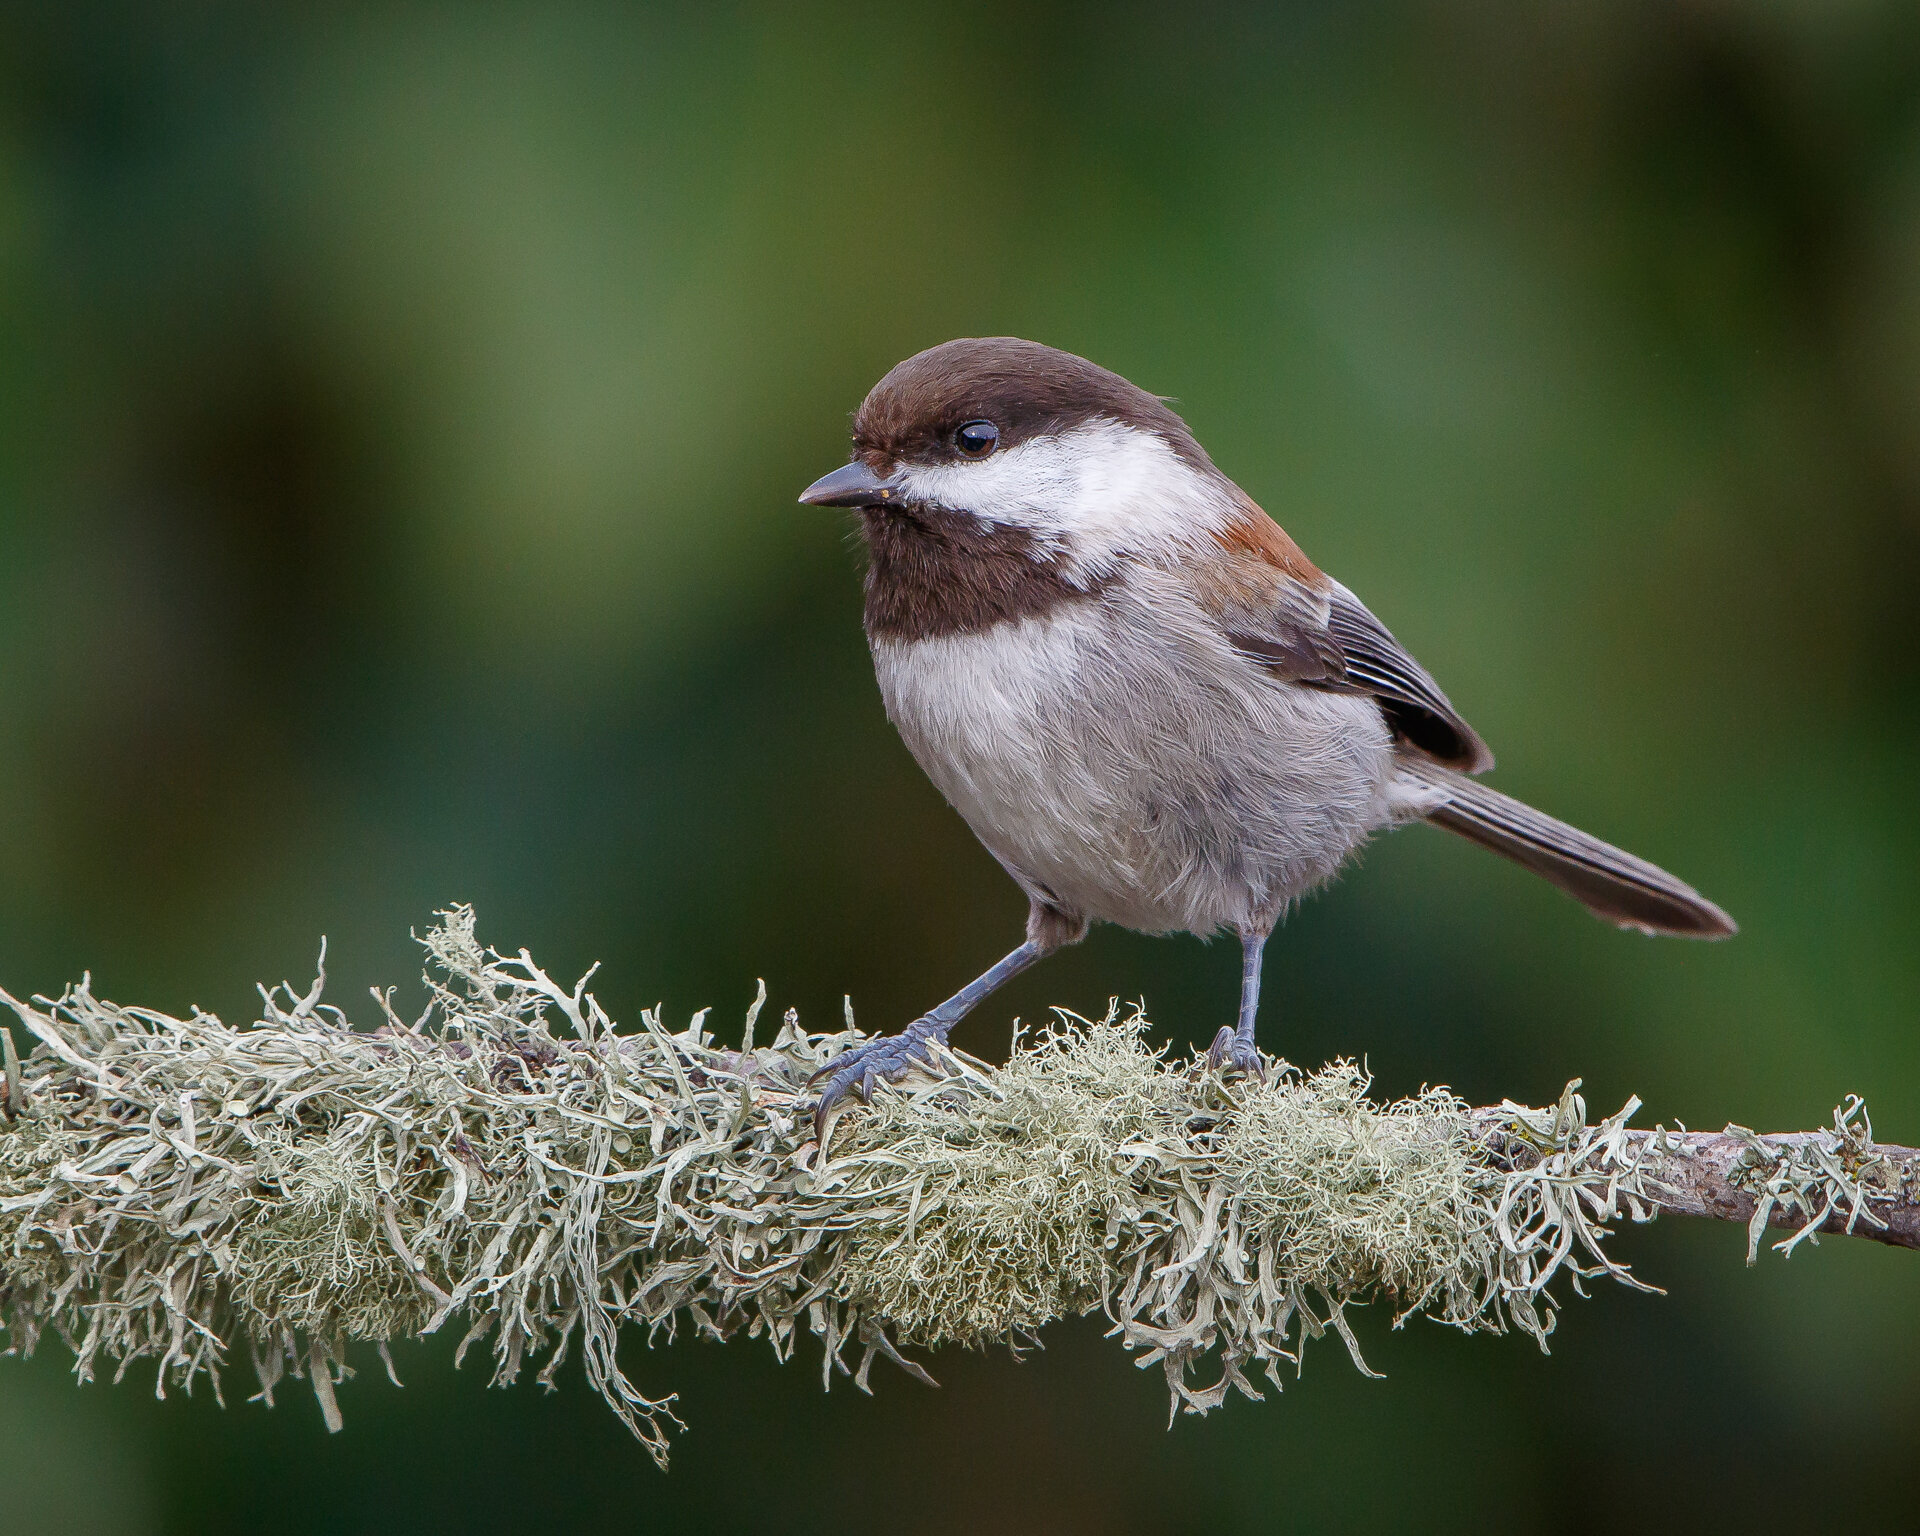 Chestnut-backed Chickadee on a lichen-covered perch